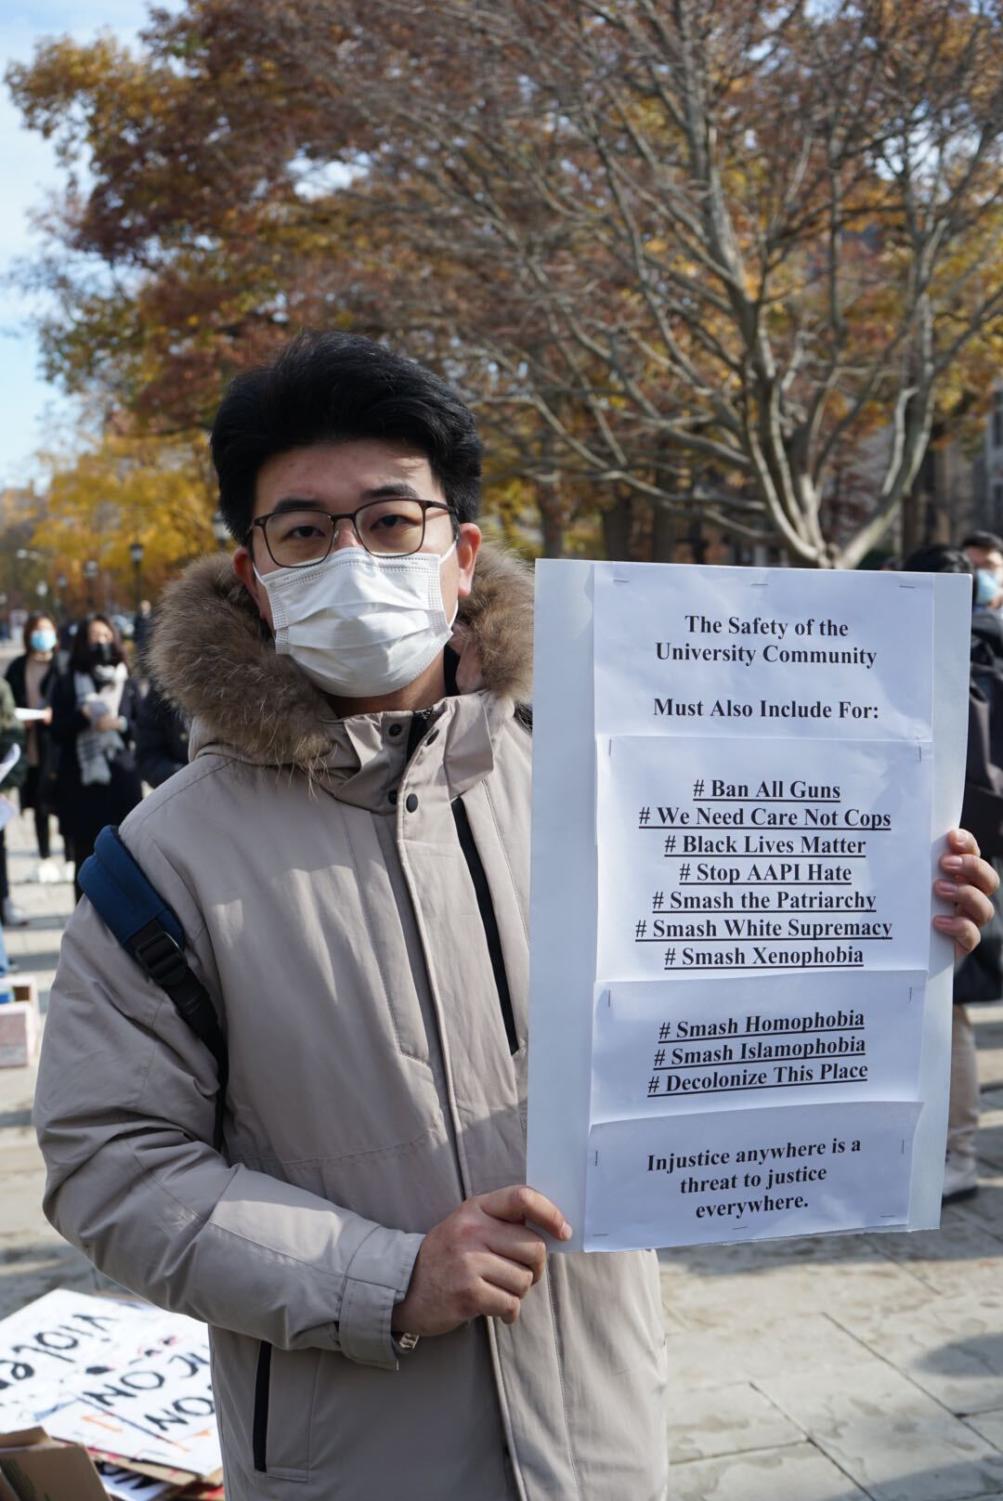 Henry Cheng, a graduate student studying history, made a sign calling for community engagement.